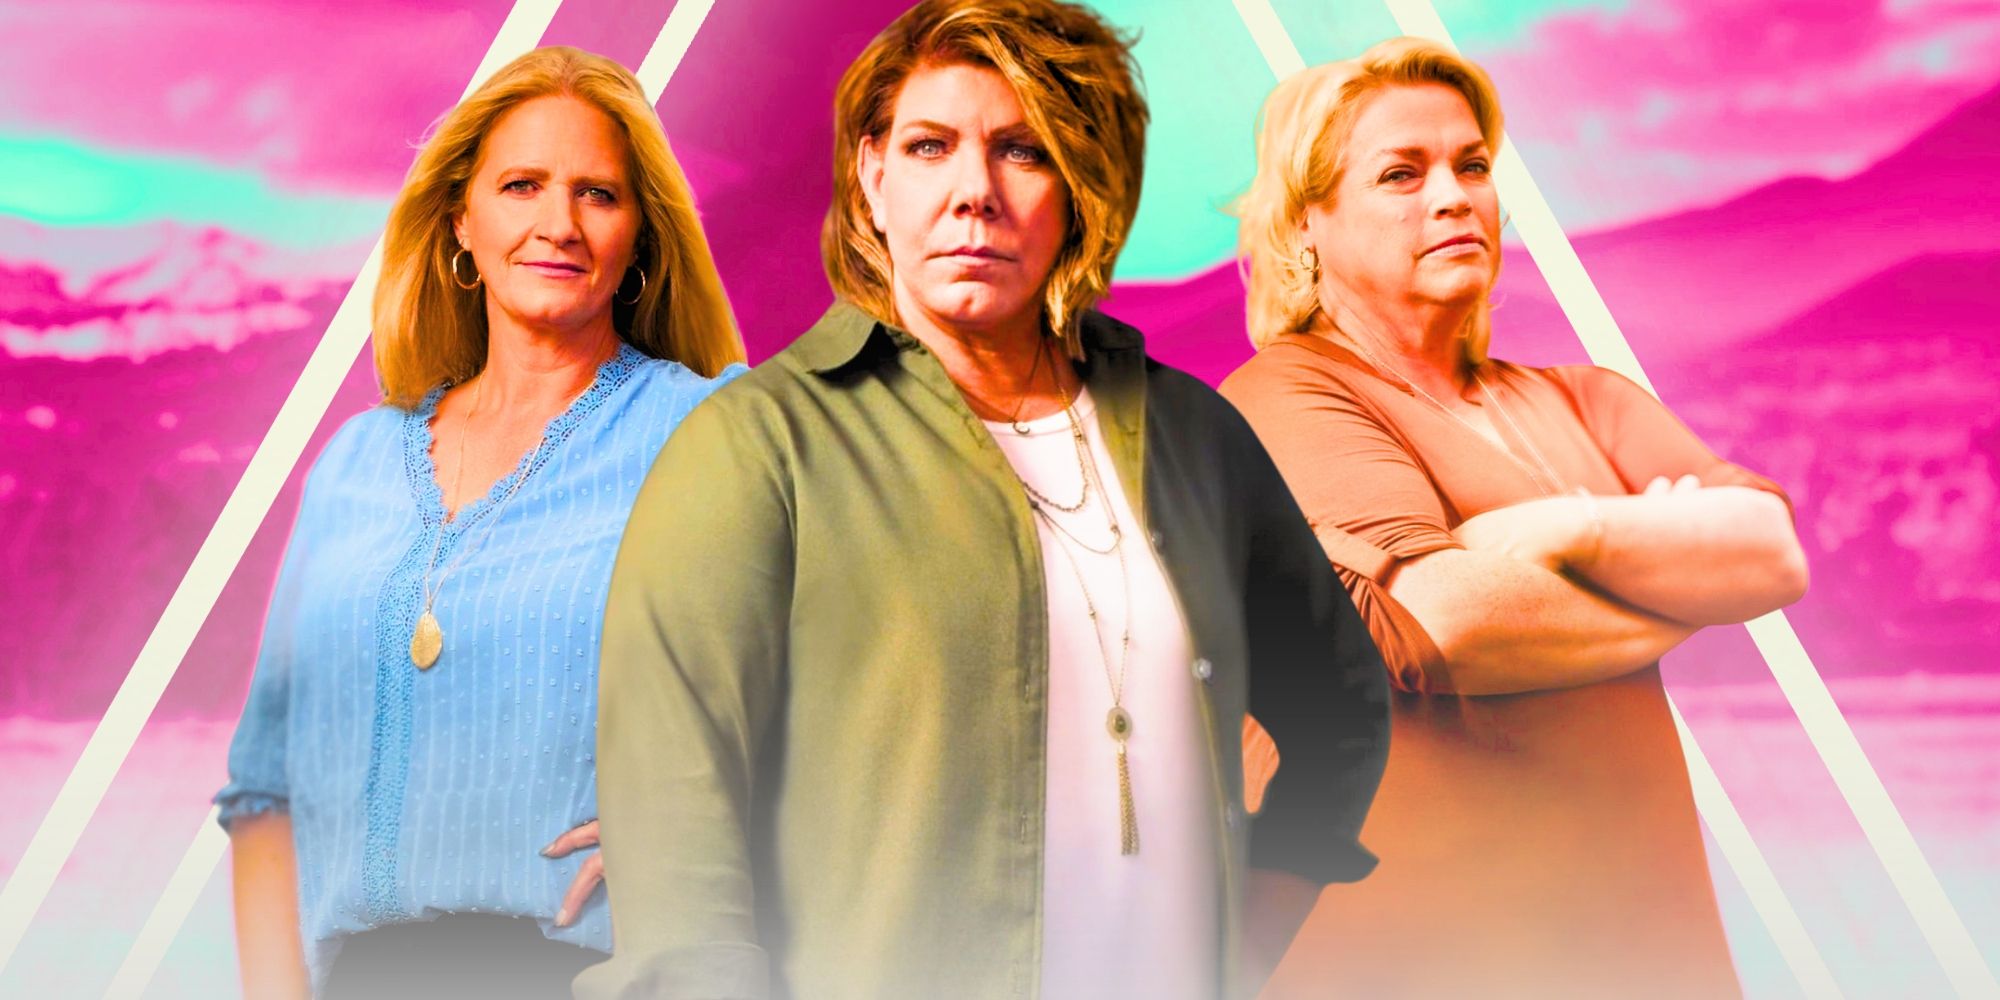 sister wives stars meri janelle and christine brown in montage with pink background